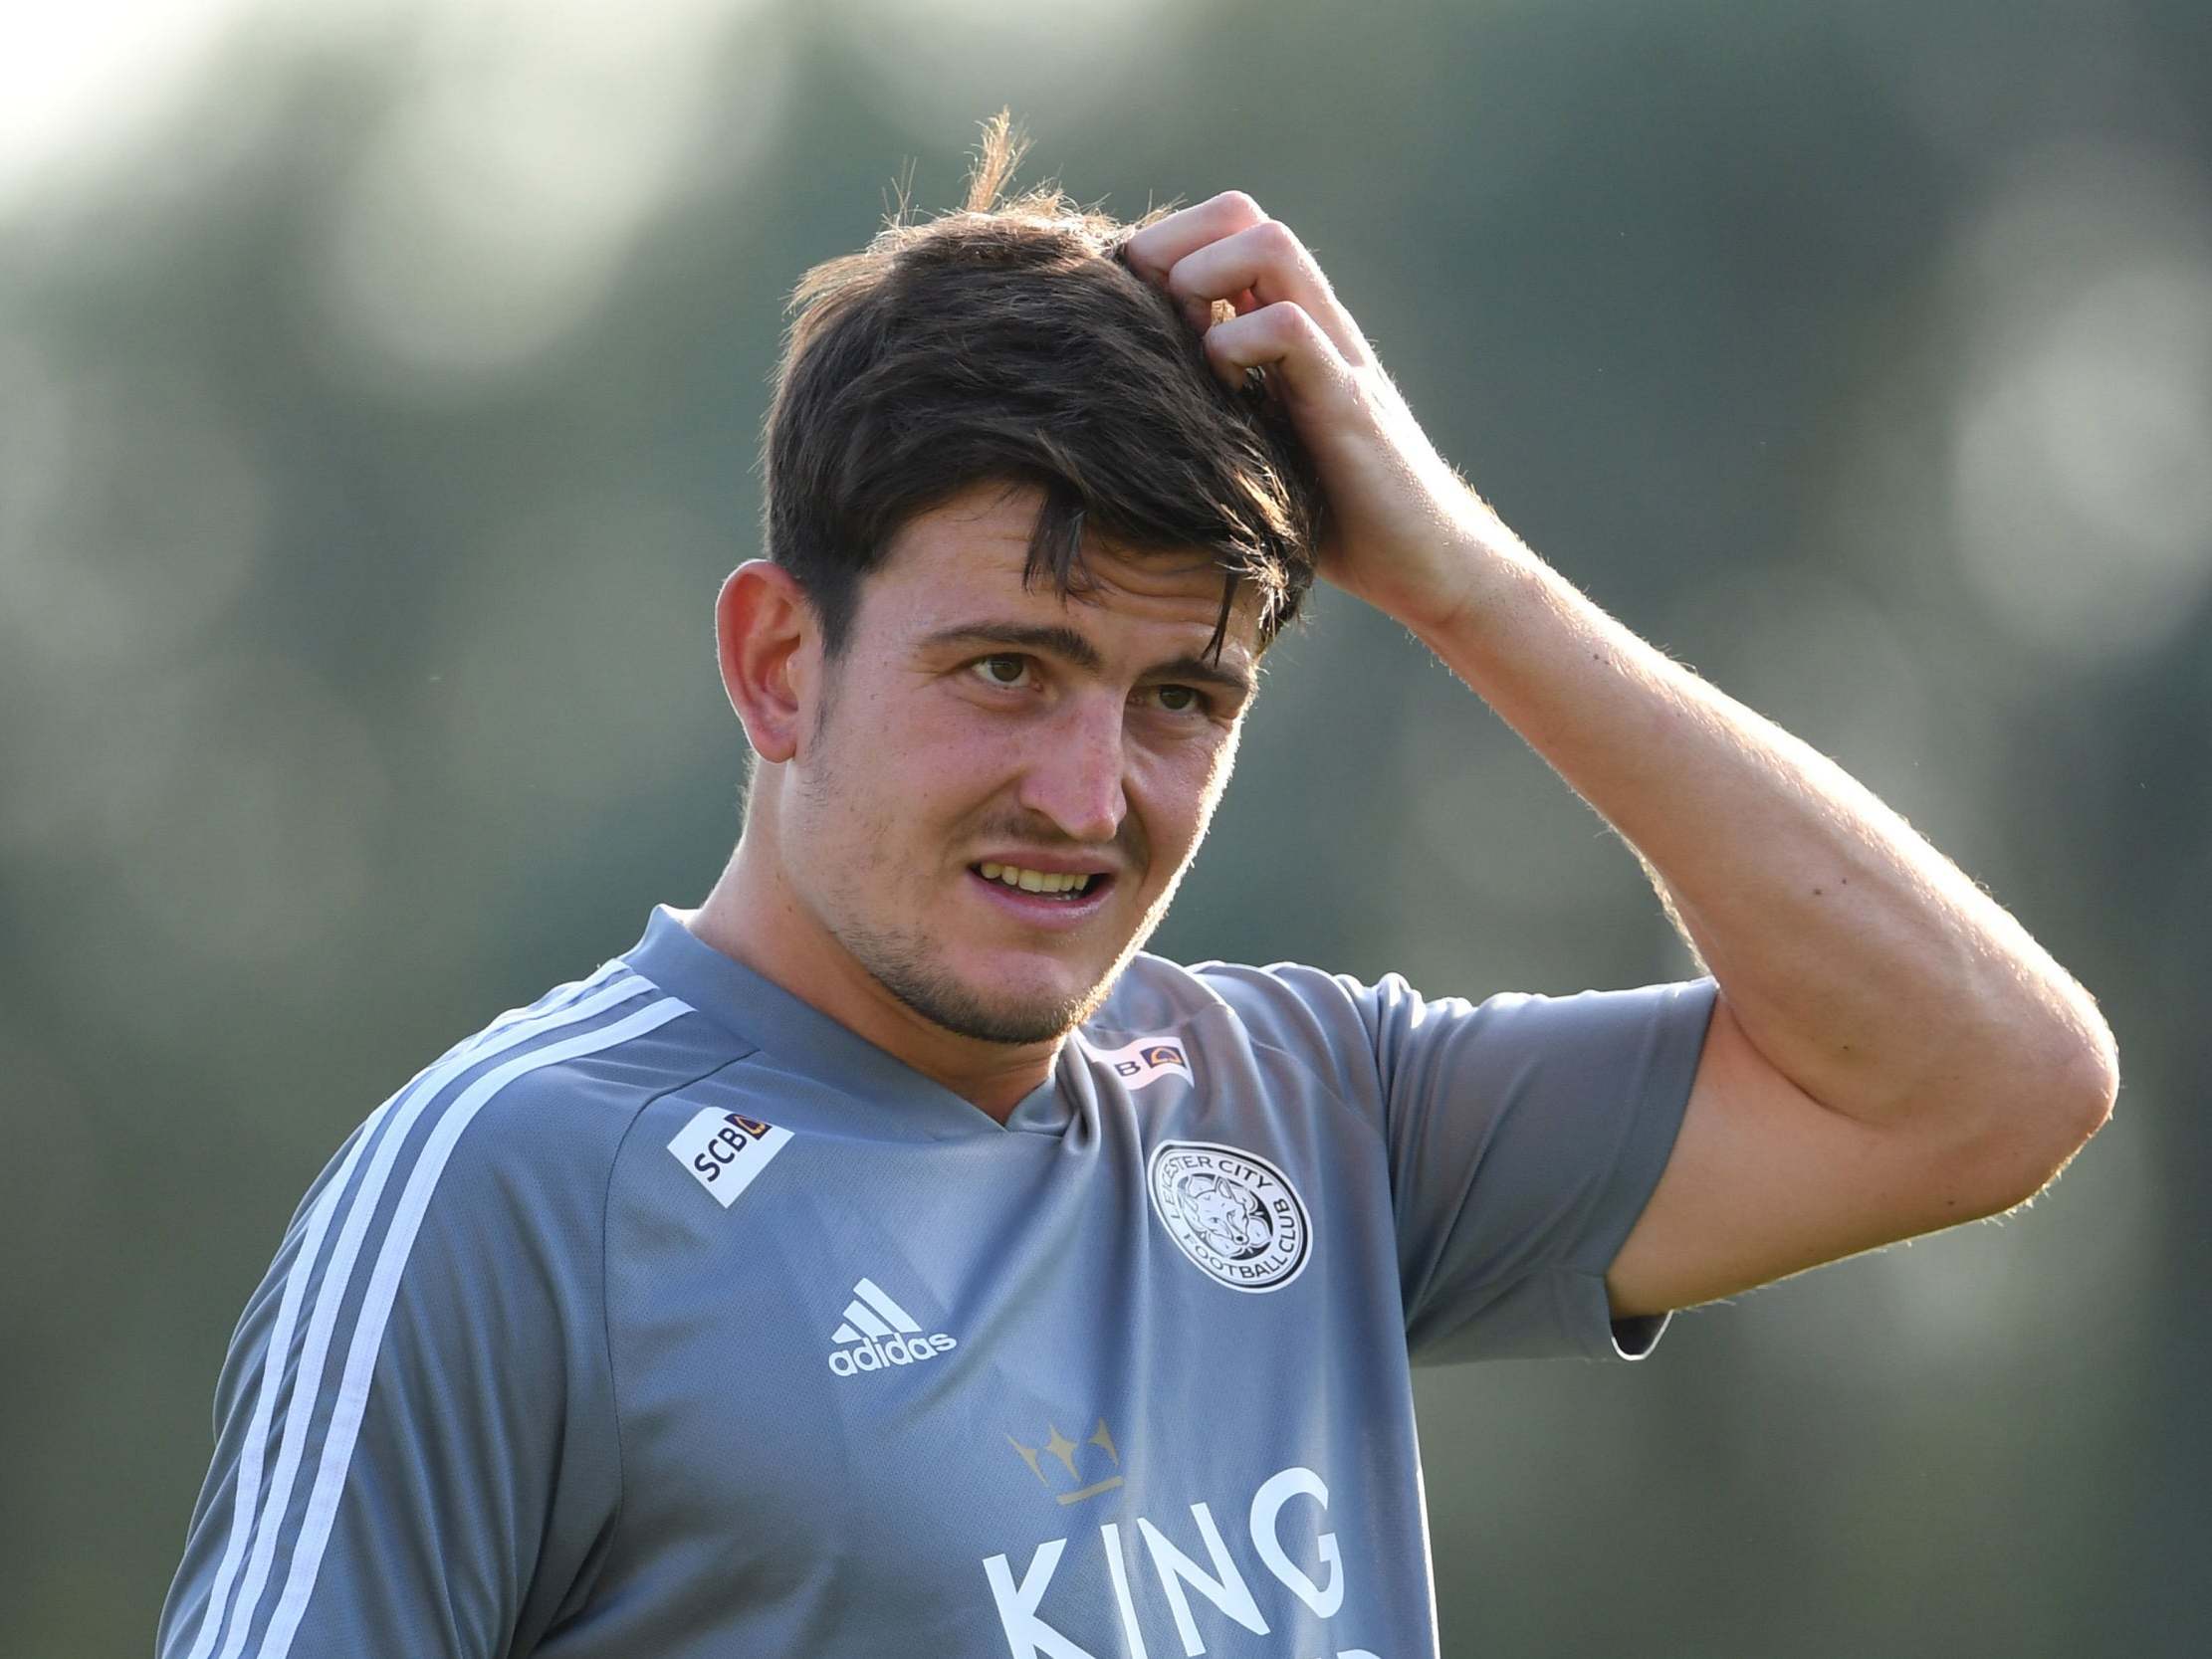 Manchester United transfer news: Wayne Rooney backs former club to make move for Harry Maguire